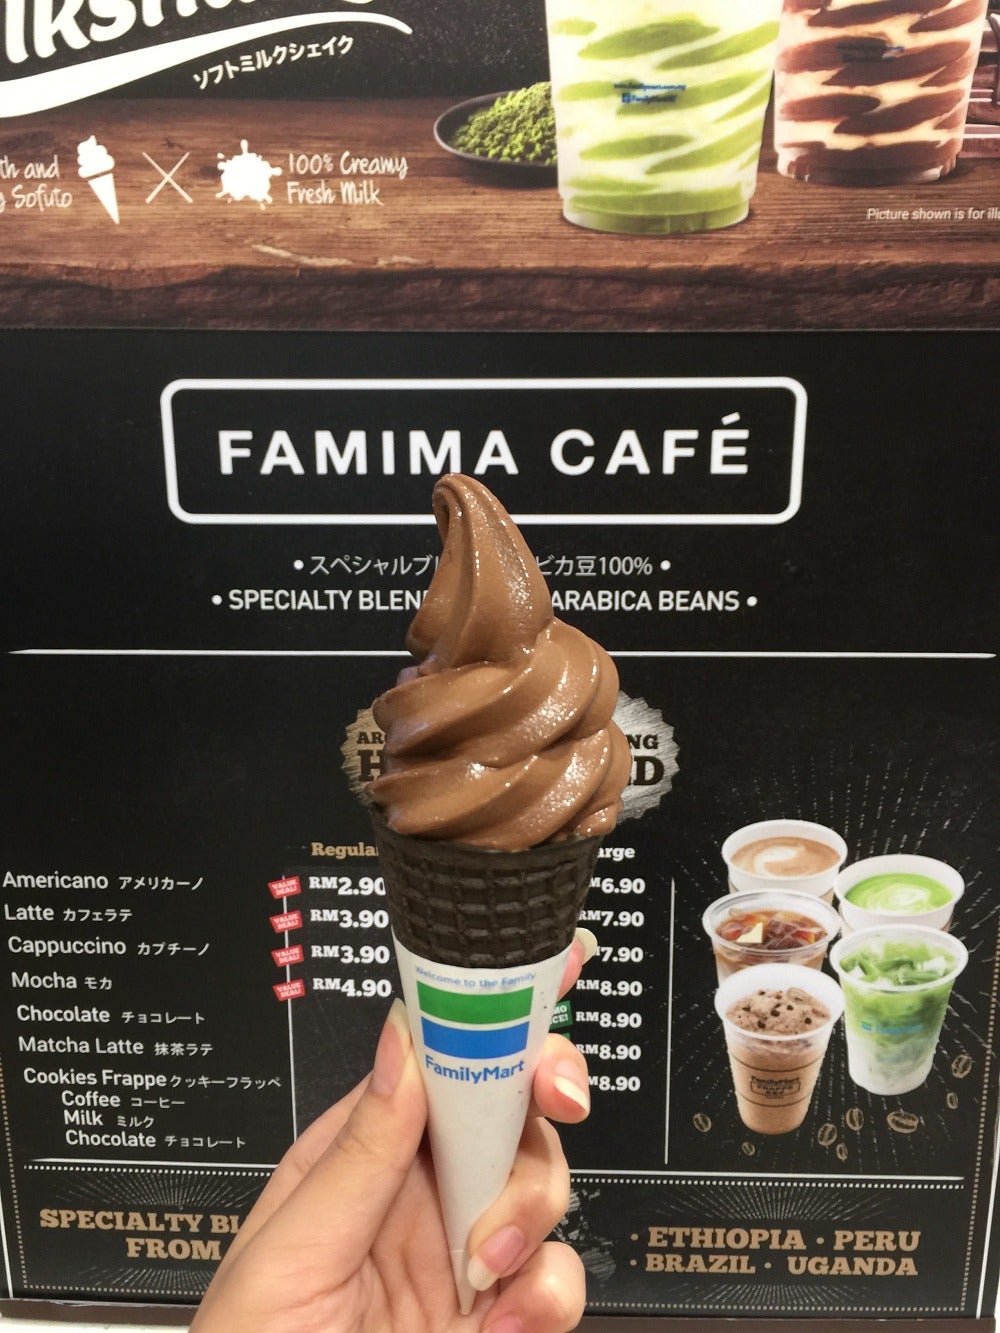 FamilyMart Malaysia Just Launched New Sofuto Flavour, Belgian Dark Chocolate & Here's Our Verdict! - WORLD OF BUZZ